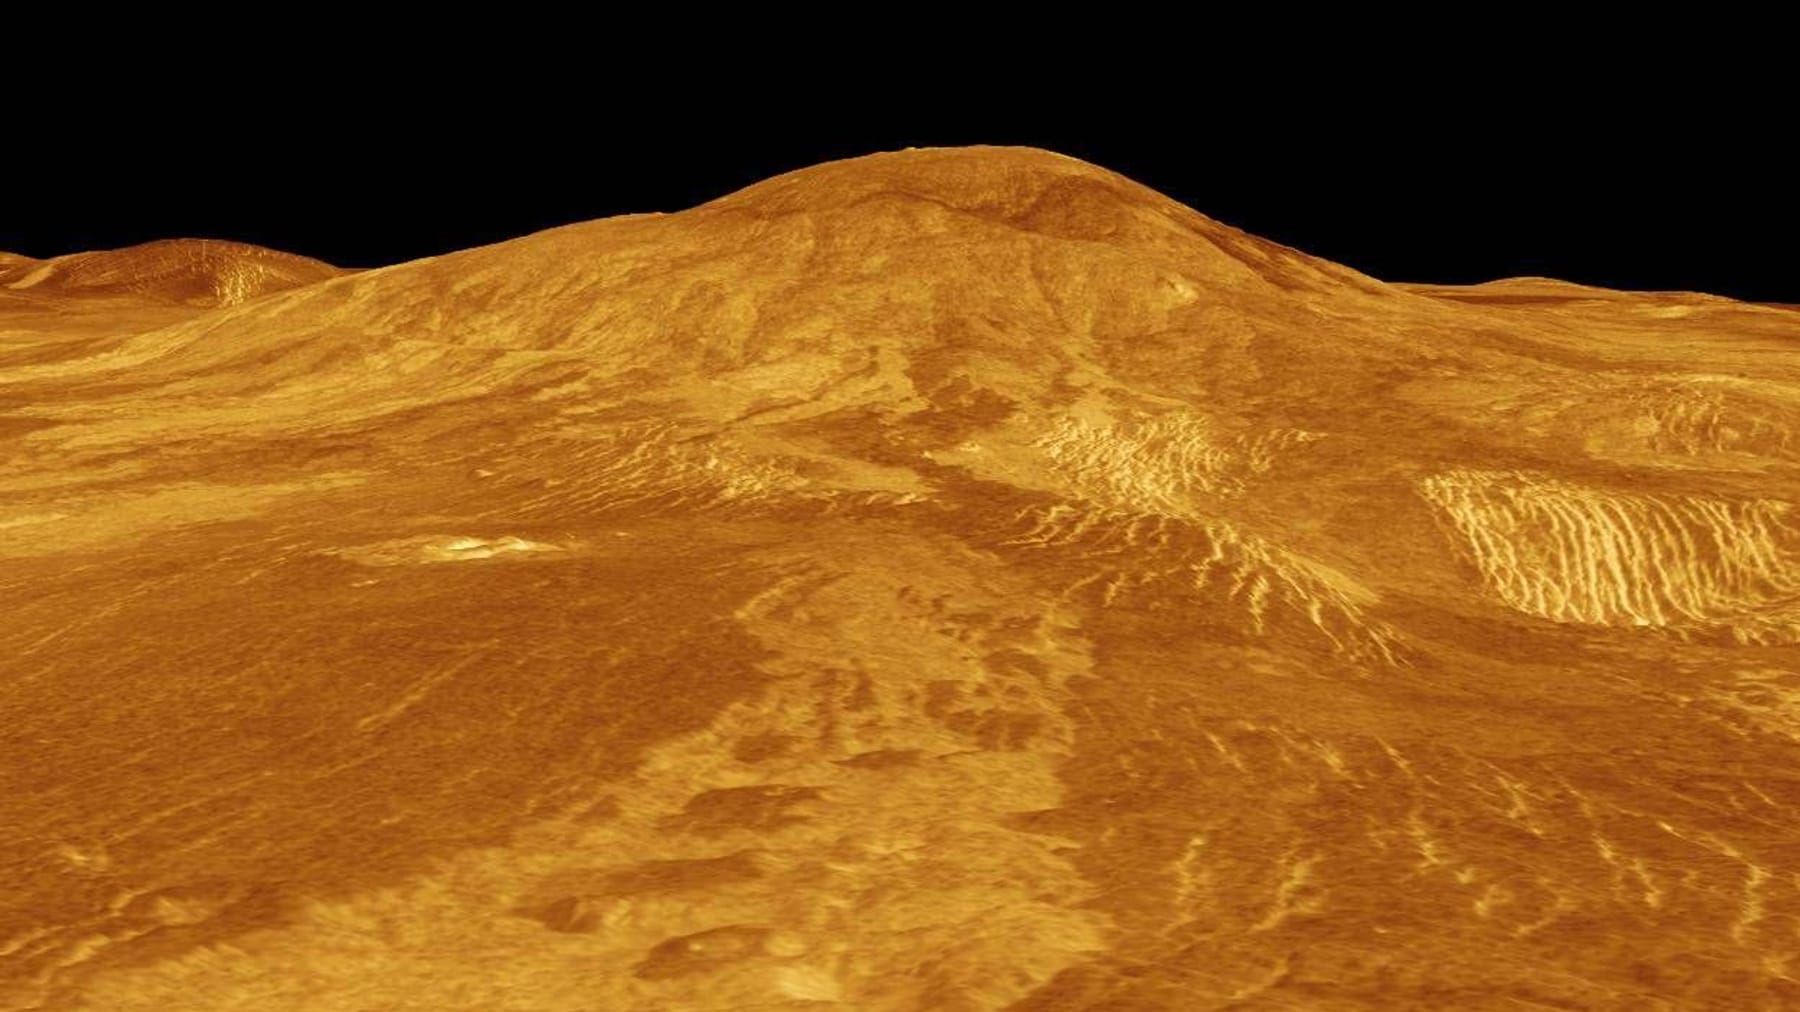 Venus: Volcanic activity “similar to that on Earth”?